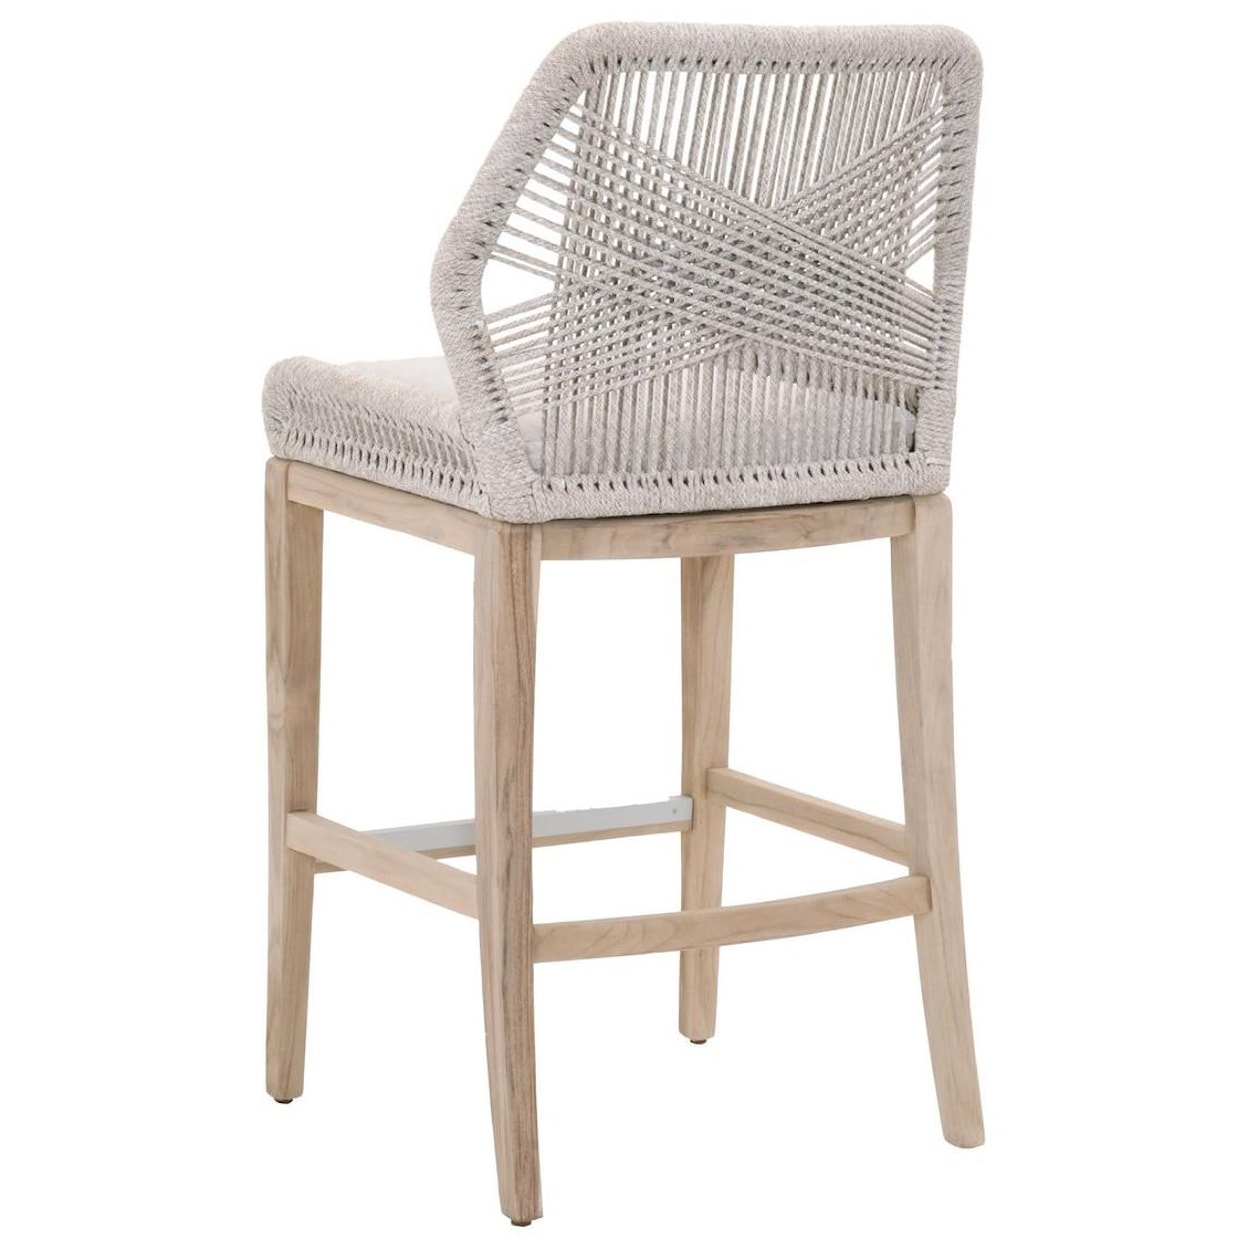 Essentials for Living Woven LOOM OUTDOOR BARSTOOL